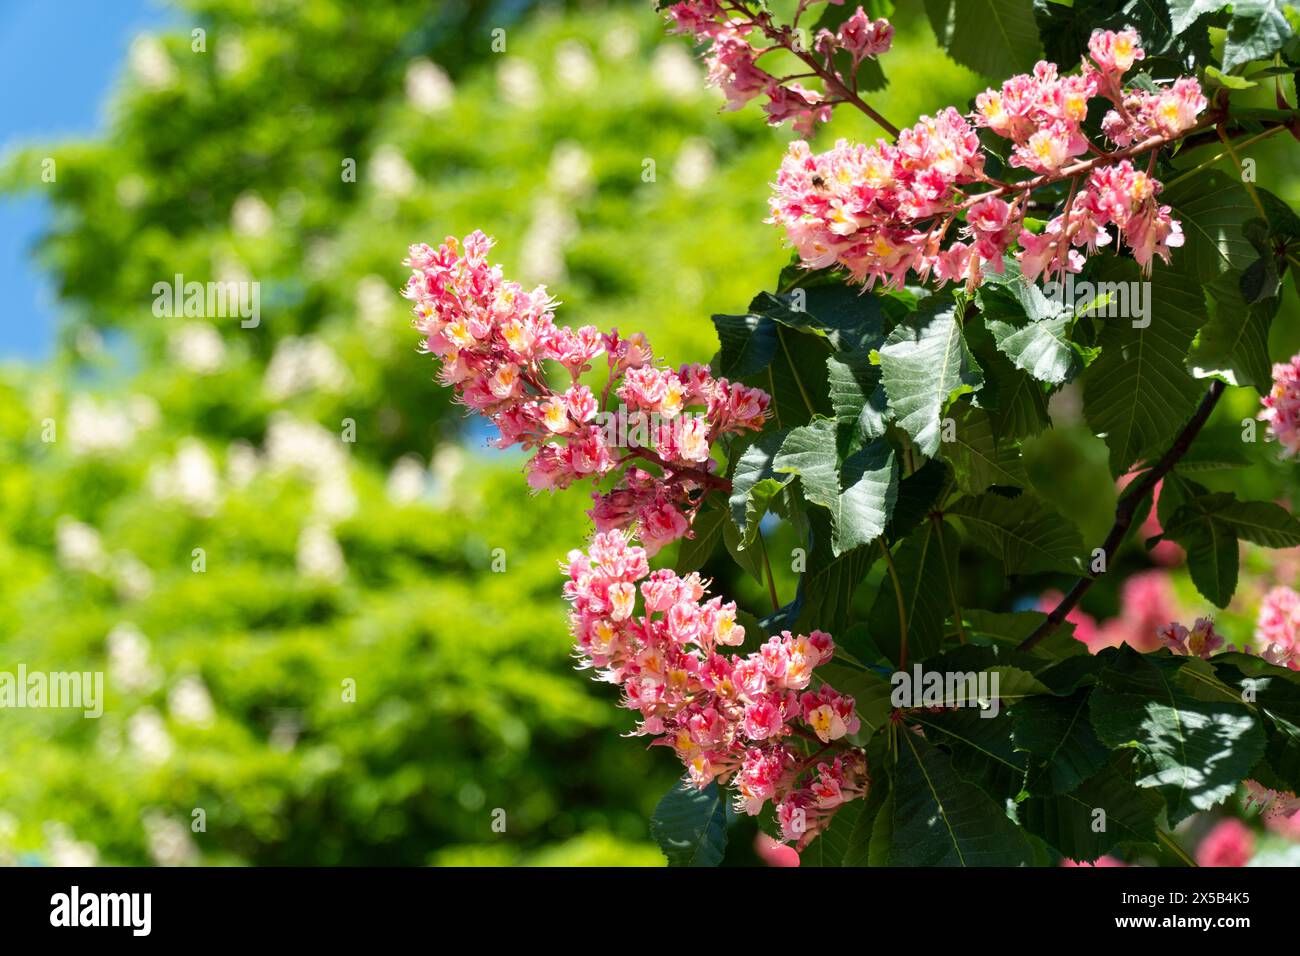 Branches of the flowering red horse-chestnuts with inflorescences Stock Photo